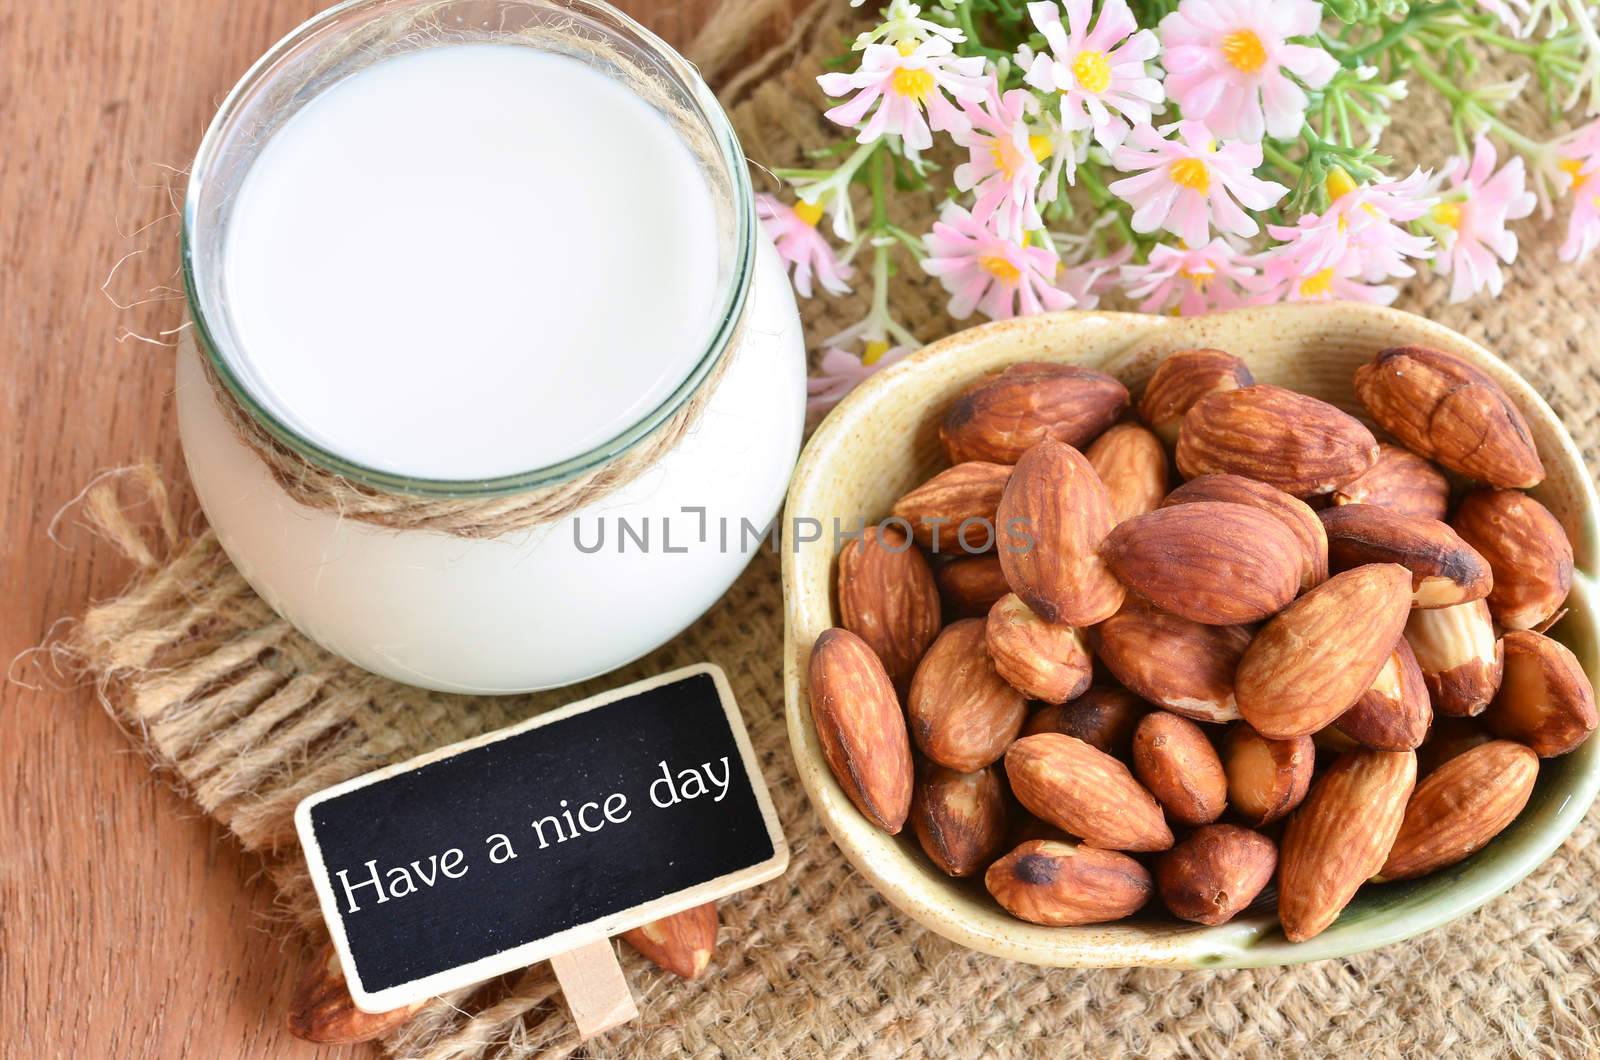 Have a nice day with almond and almond milk. by Gamjai